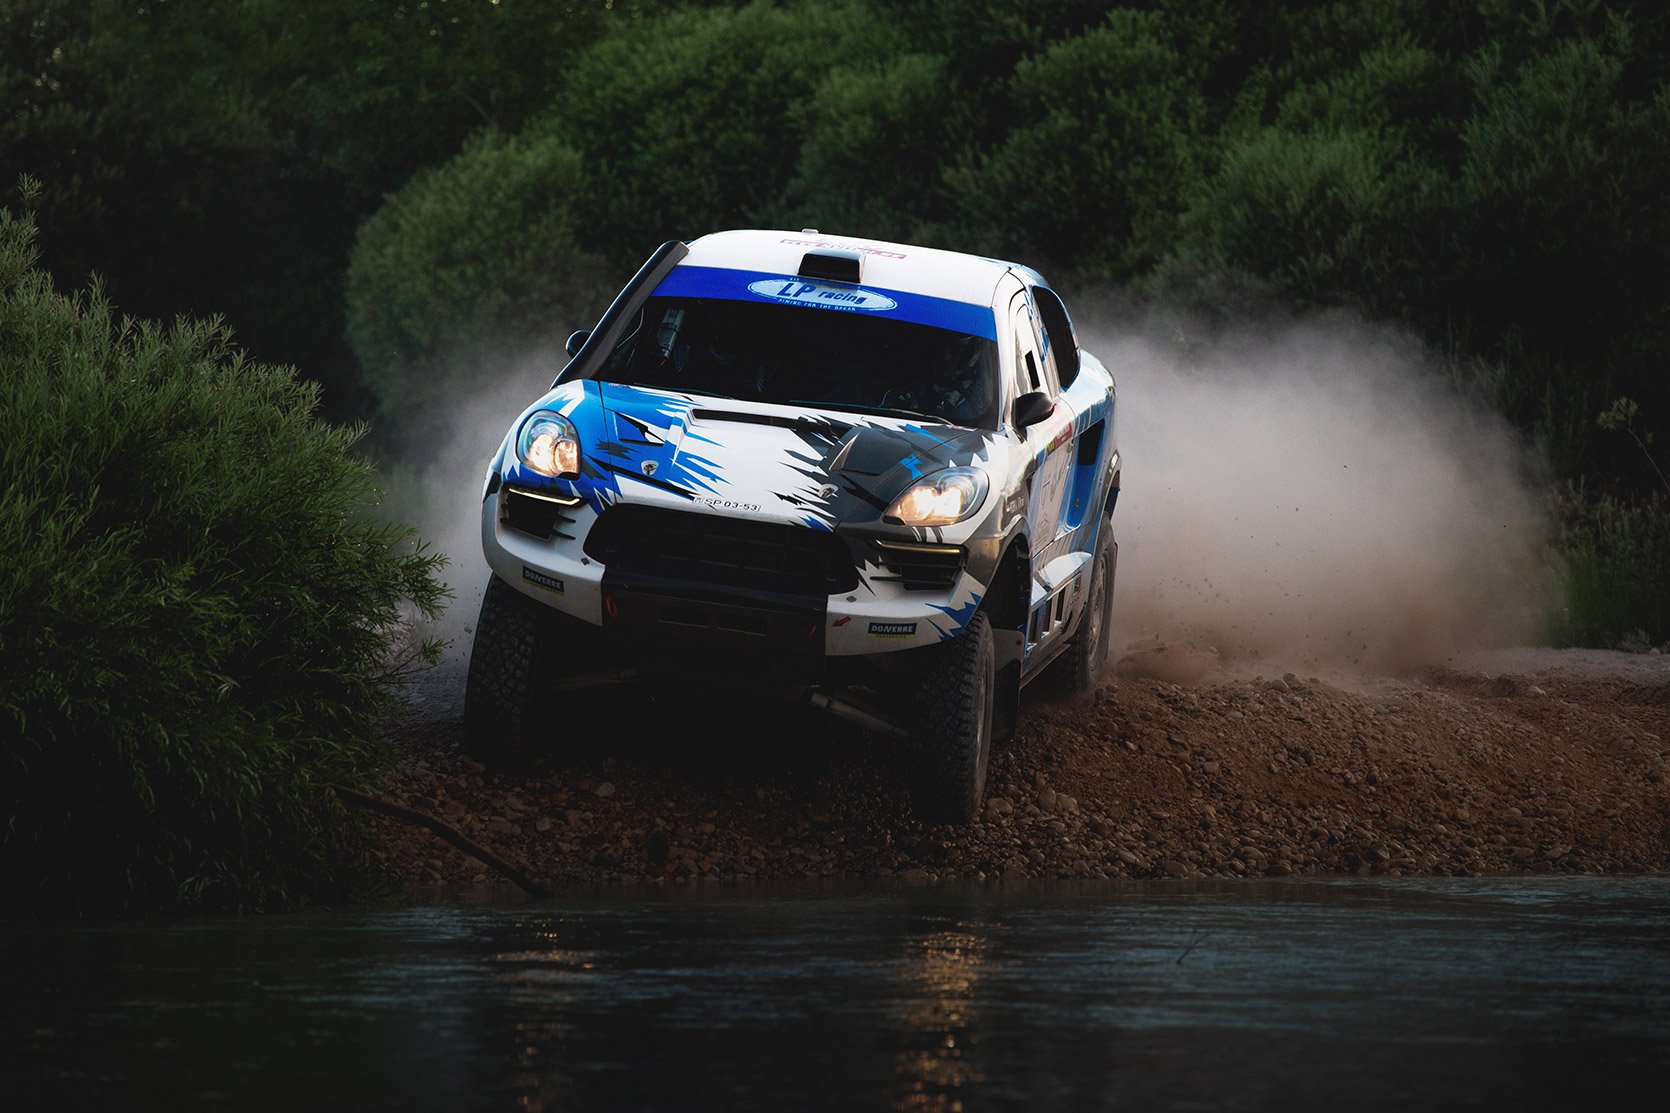 LP Racing on their Porsche Macan are going to dip in the river at Italian Baja